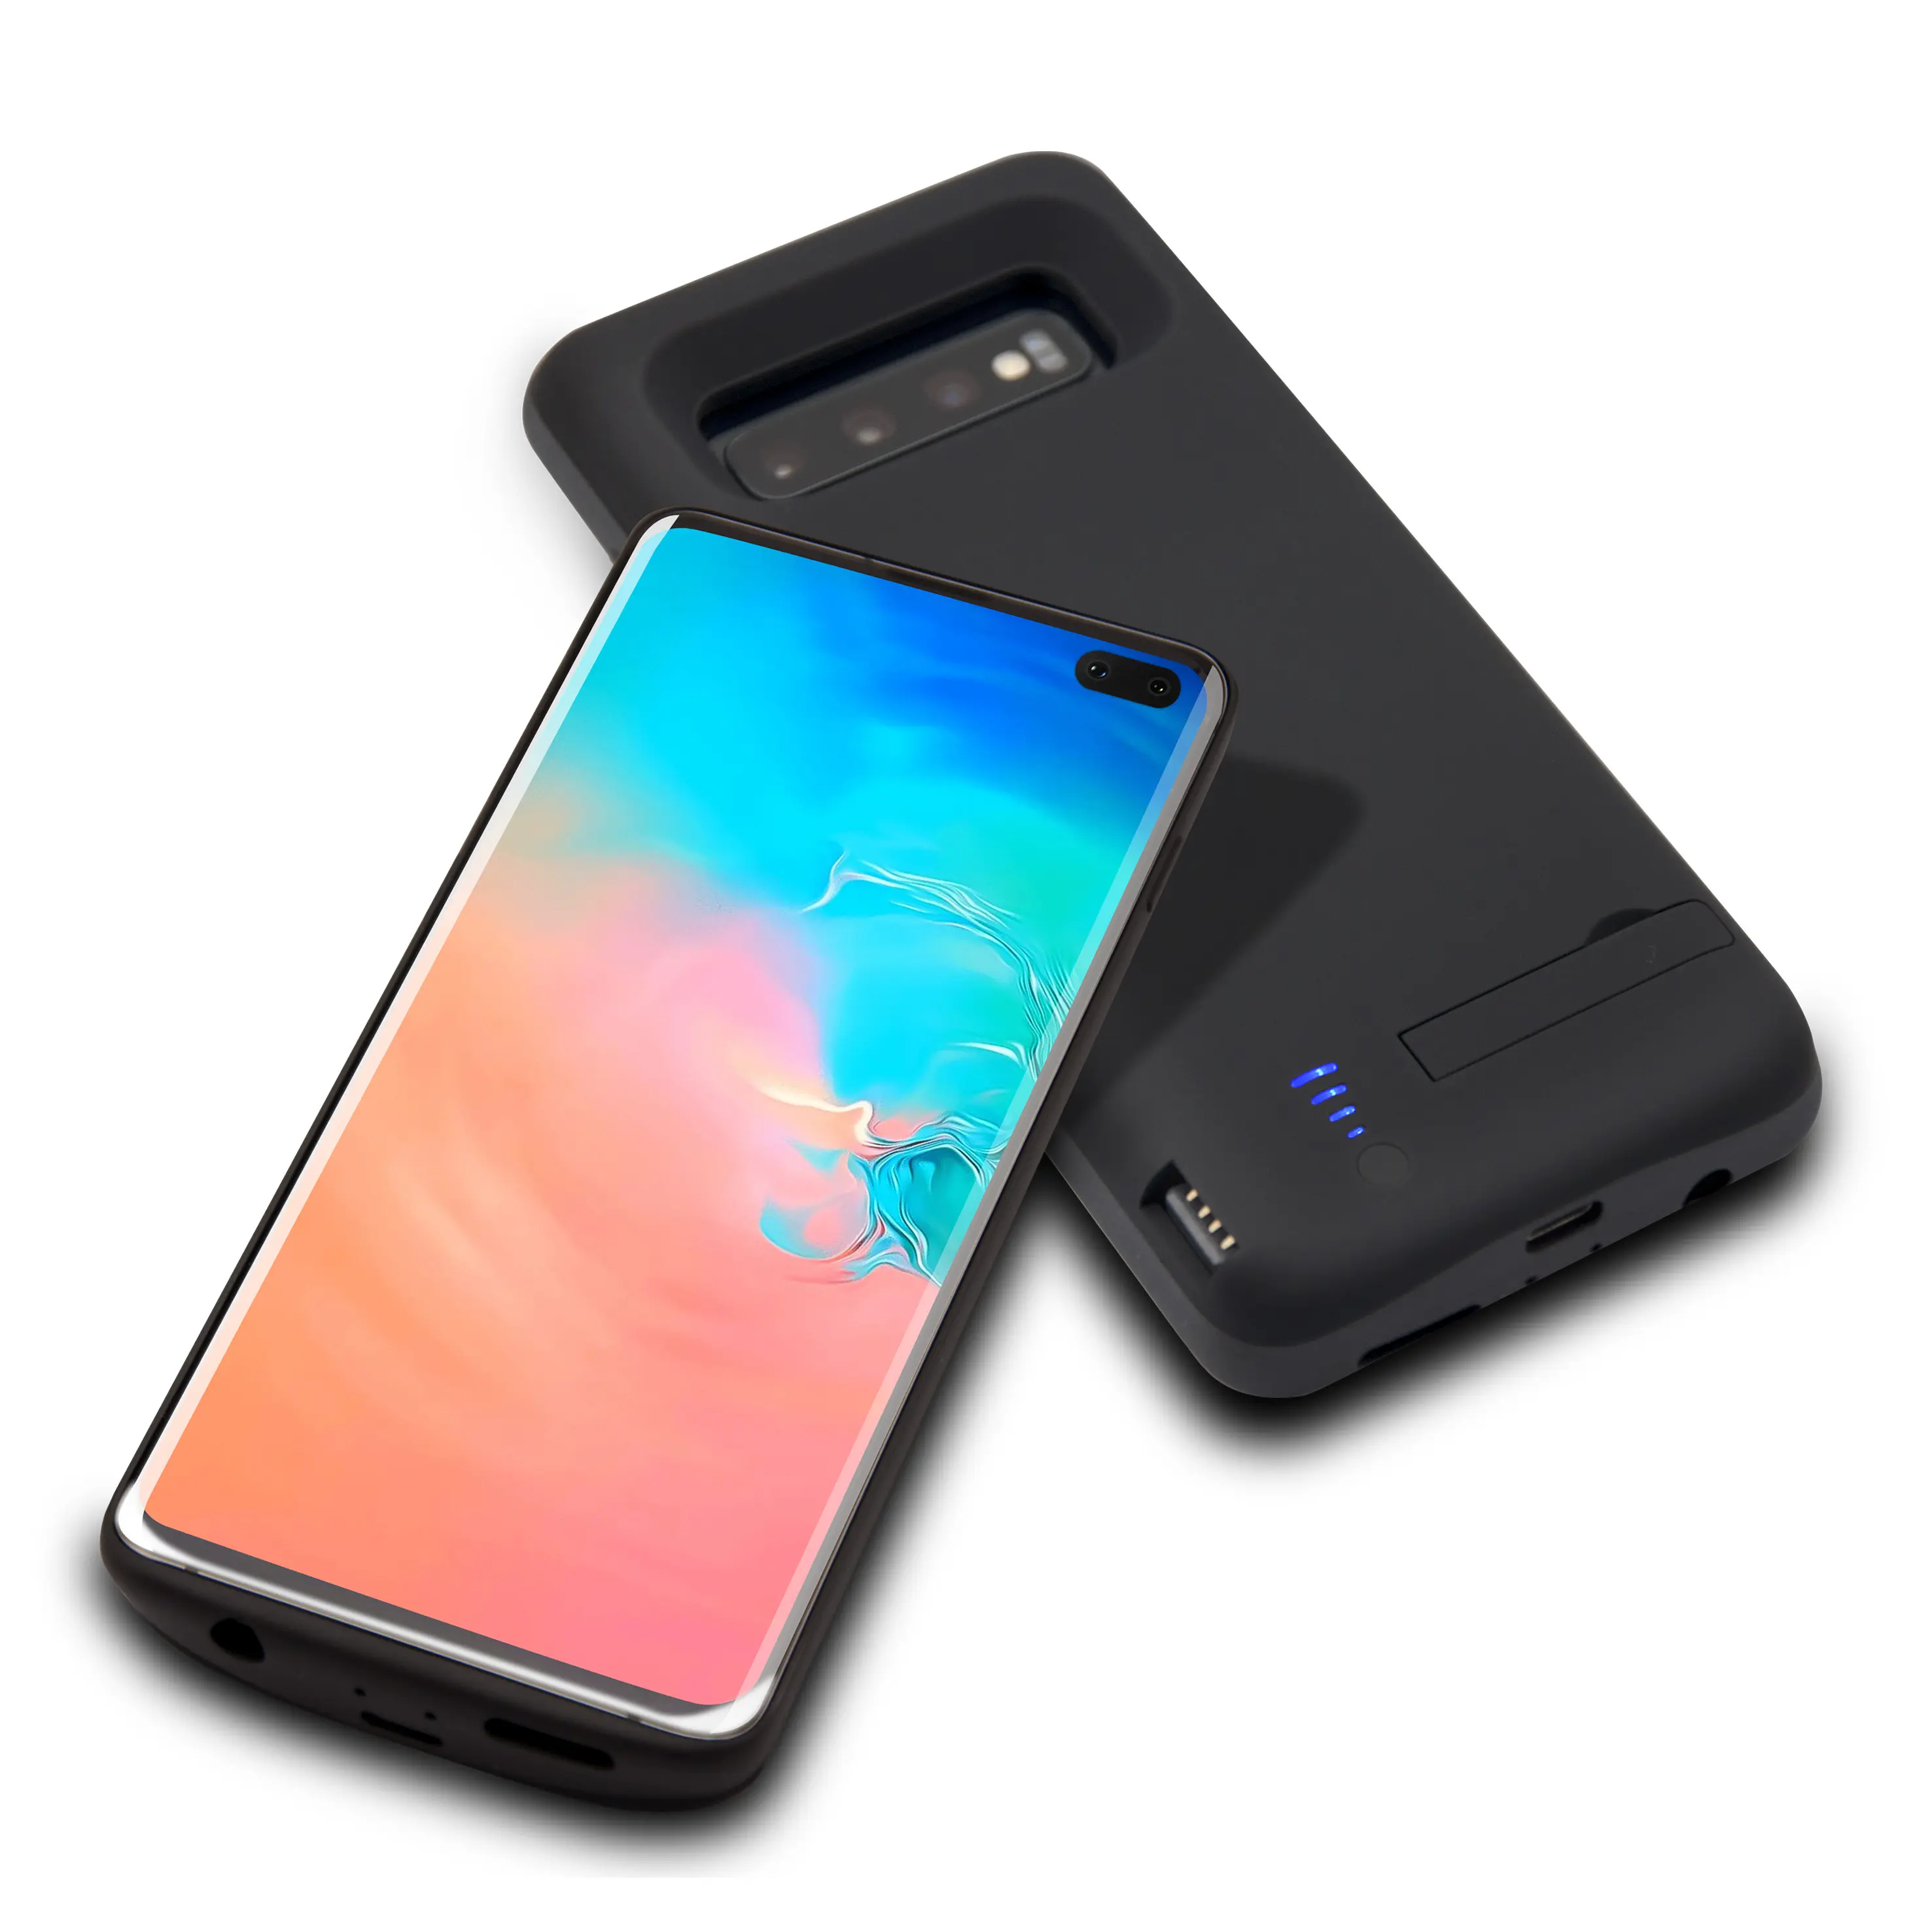 2022 hot selling smart battery case back clip cover charger portable power bank for Samsung Galaxy S10 plus